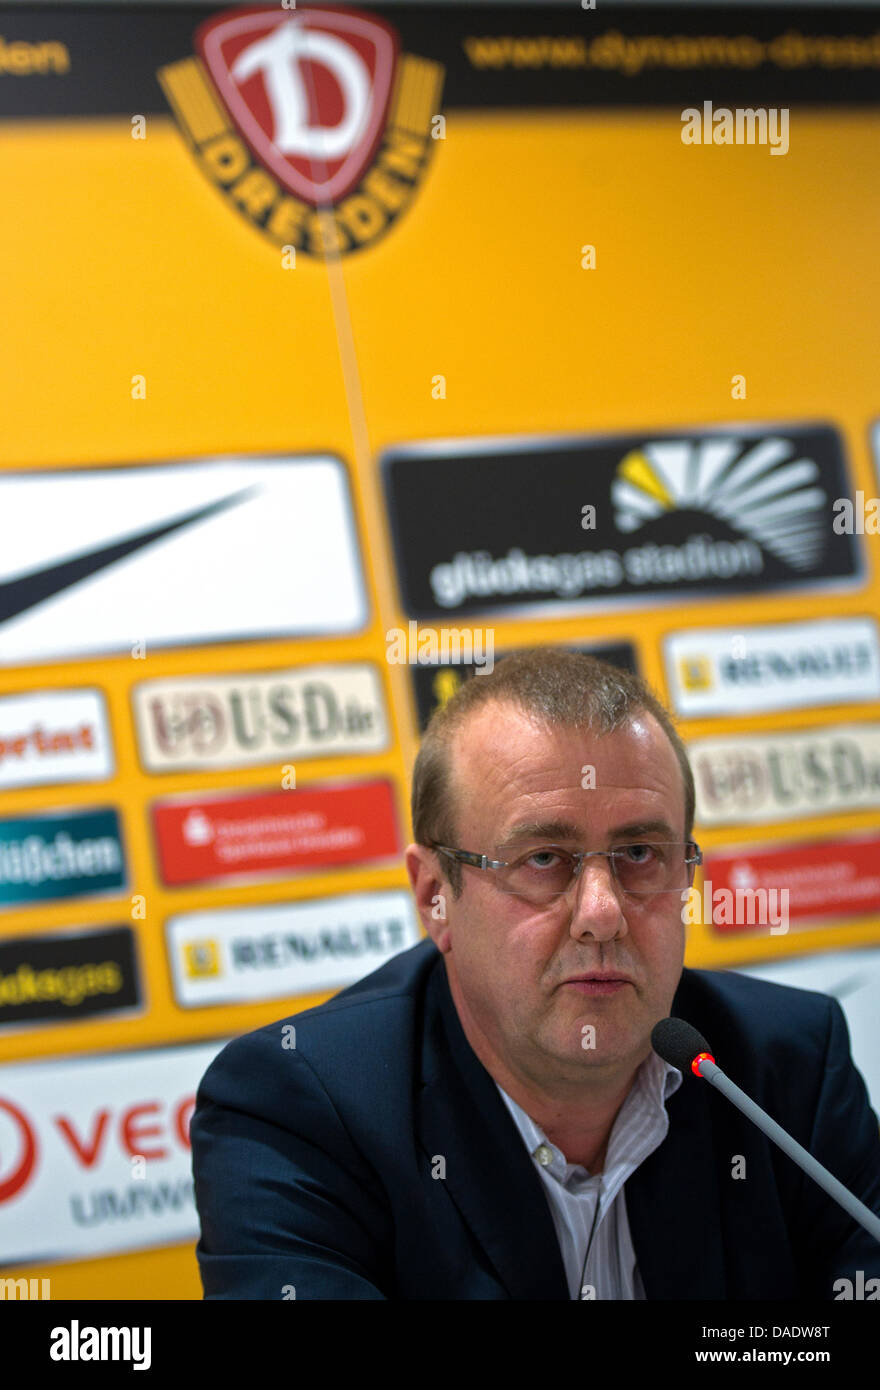 Andreas Ritter, SG Dynamo Dresden club president, speaks during a press conference at Glueckgas Arena in Dresden, Germany, 02 November 2011. During the press conference, Managing Director of SG Dynamo Dresden Oppitz as well as Boerner, organization and events director, commented on the complaint by the supervisory committee of the German Football Association. Photo: Arno Burgi Stock Photo